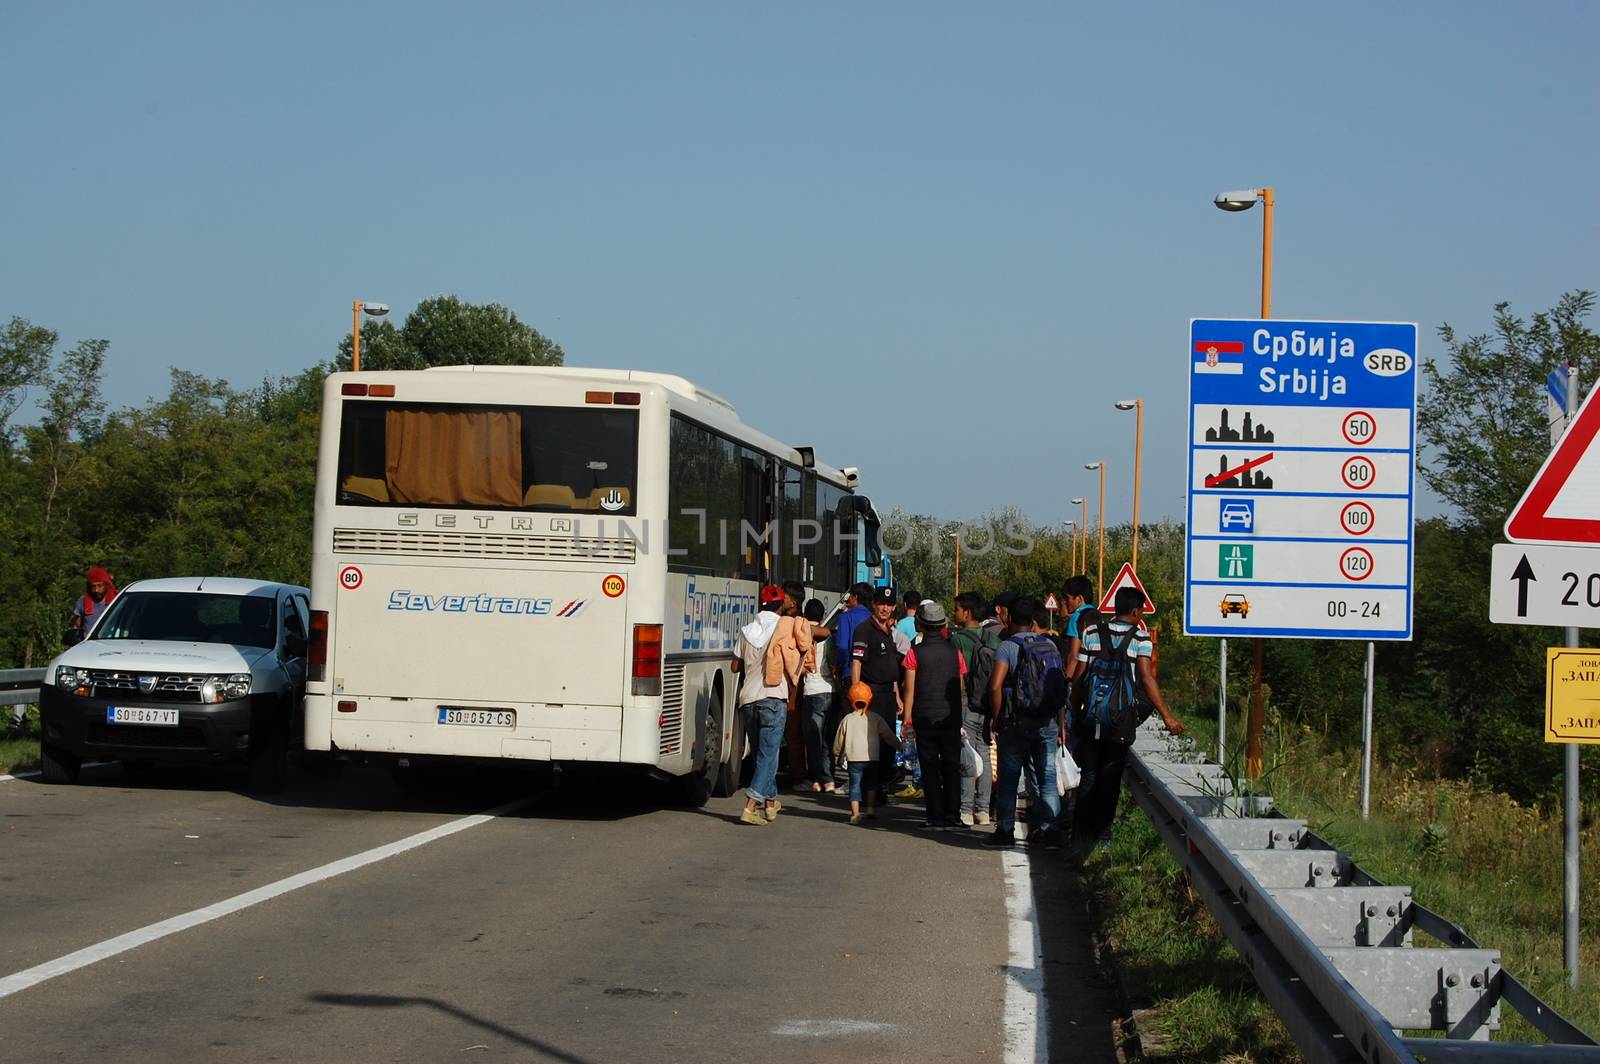 SERBIA, Border with Croatia: Refugees gather around their bus as hundreds are stranded at the Serbian-Croatian border on September 18, 2015 after Croatia decided to shut their border with Serbia.This decision was made after more than 11,000 refugees entered Croatia in a single day. Refugees had to spend entire night and half of the next day at the border. Local authorities in Serbia have organized bus transportation to take the refugees from the border to the reception camps.